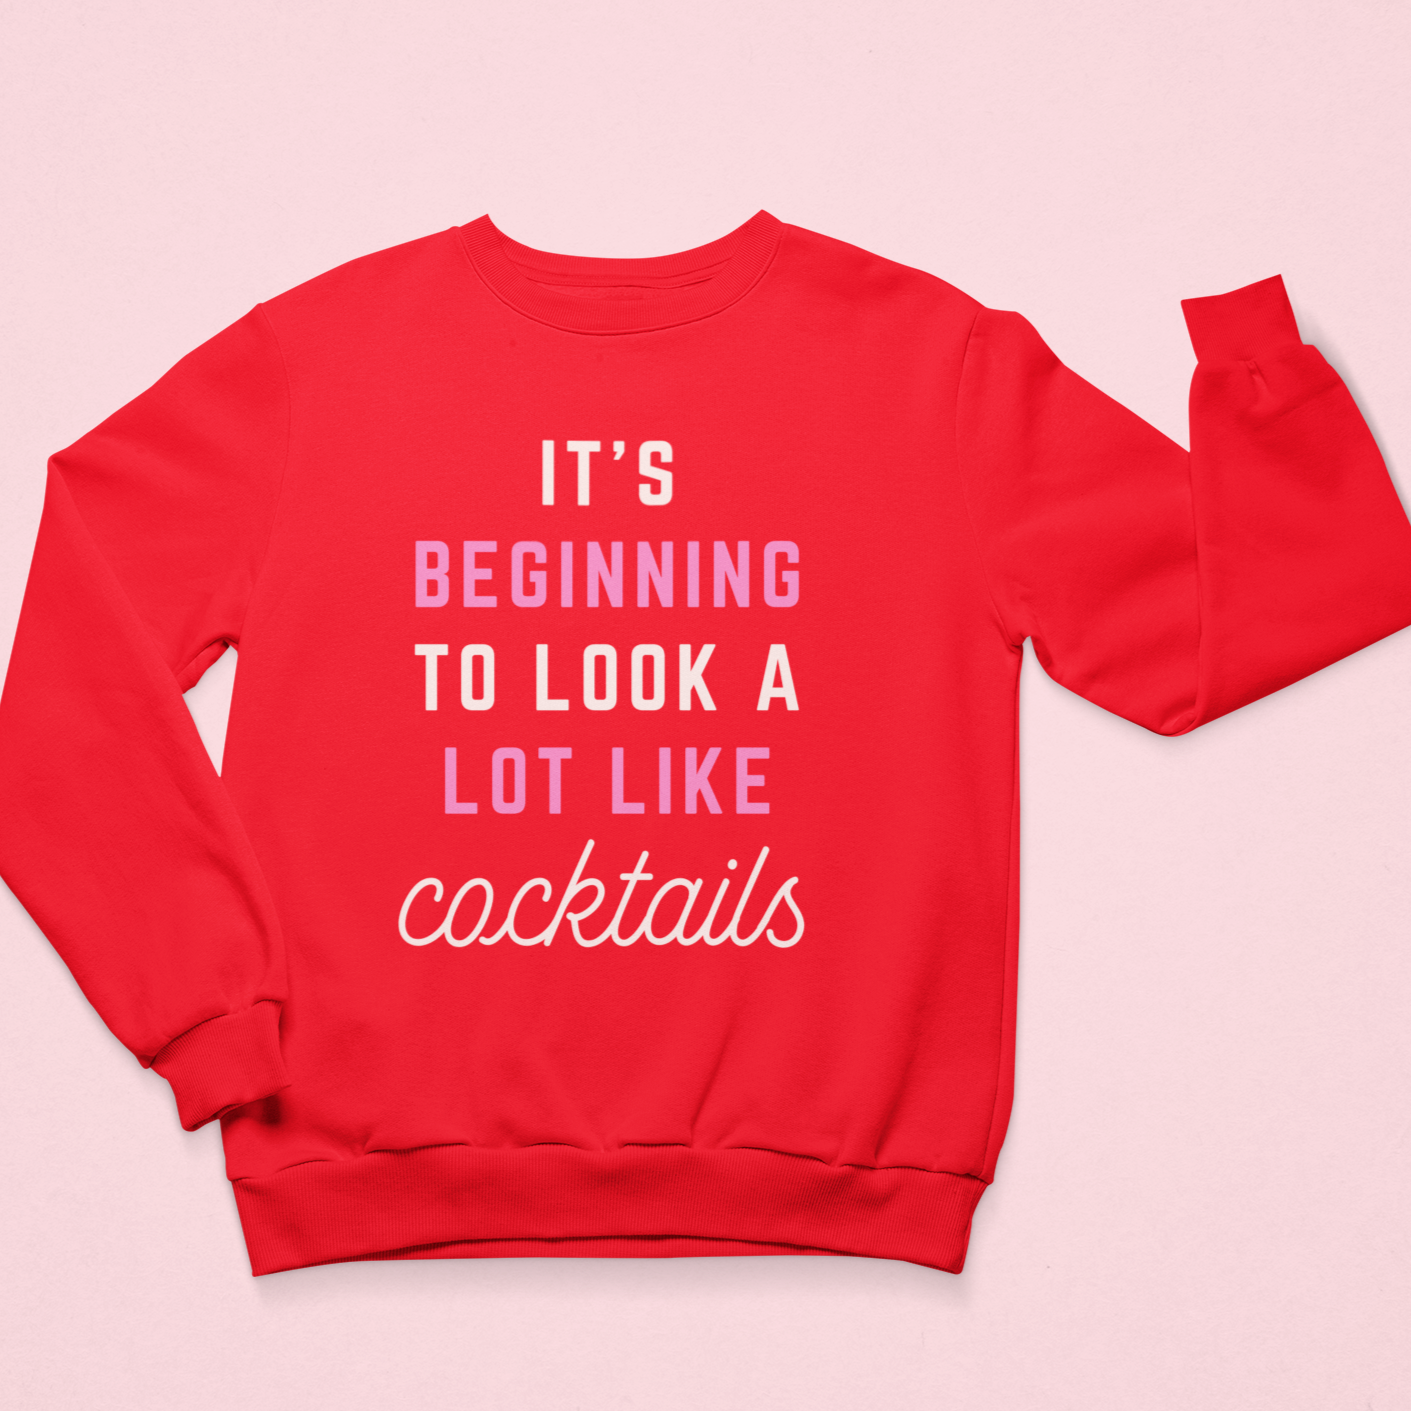 It's beginning to look a lot like cocktails Sweatshirt